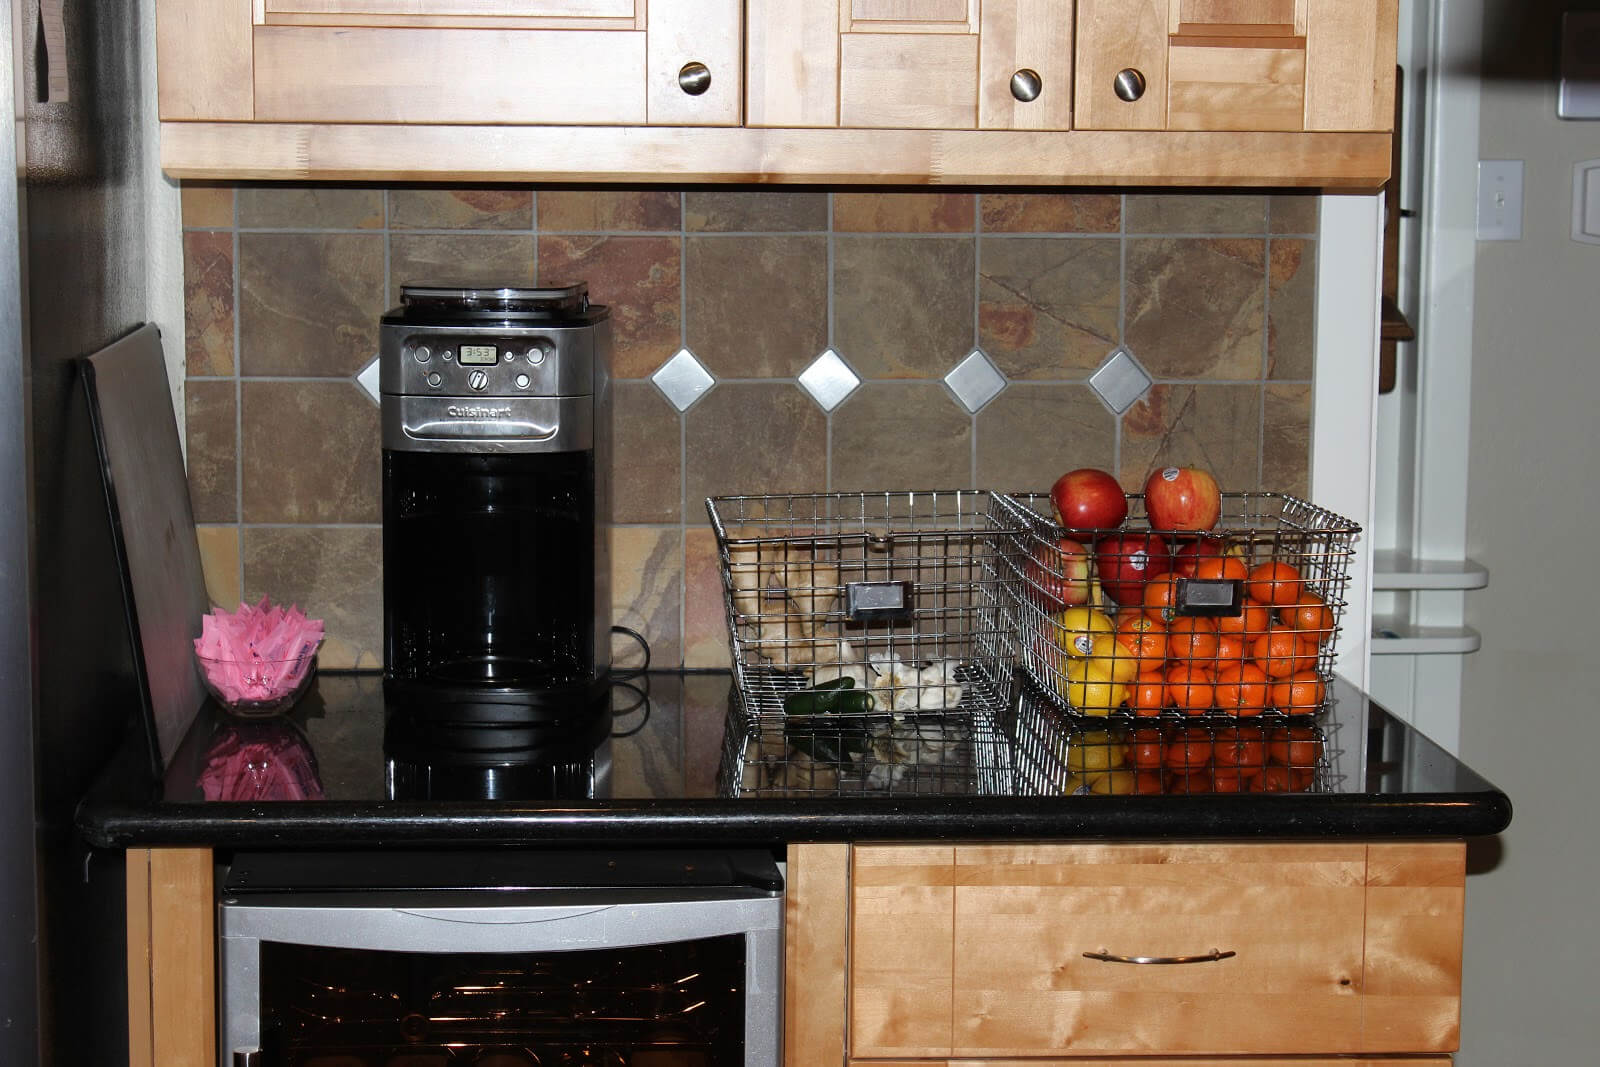 black kitchen countertop with light wood cabinets wire baskets on counter with fruits coffee maker